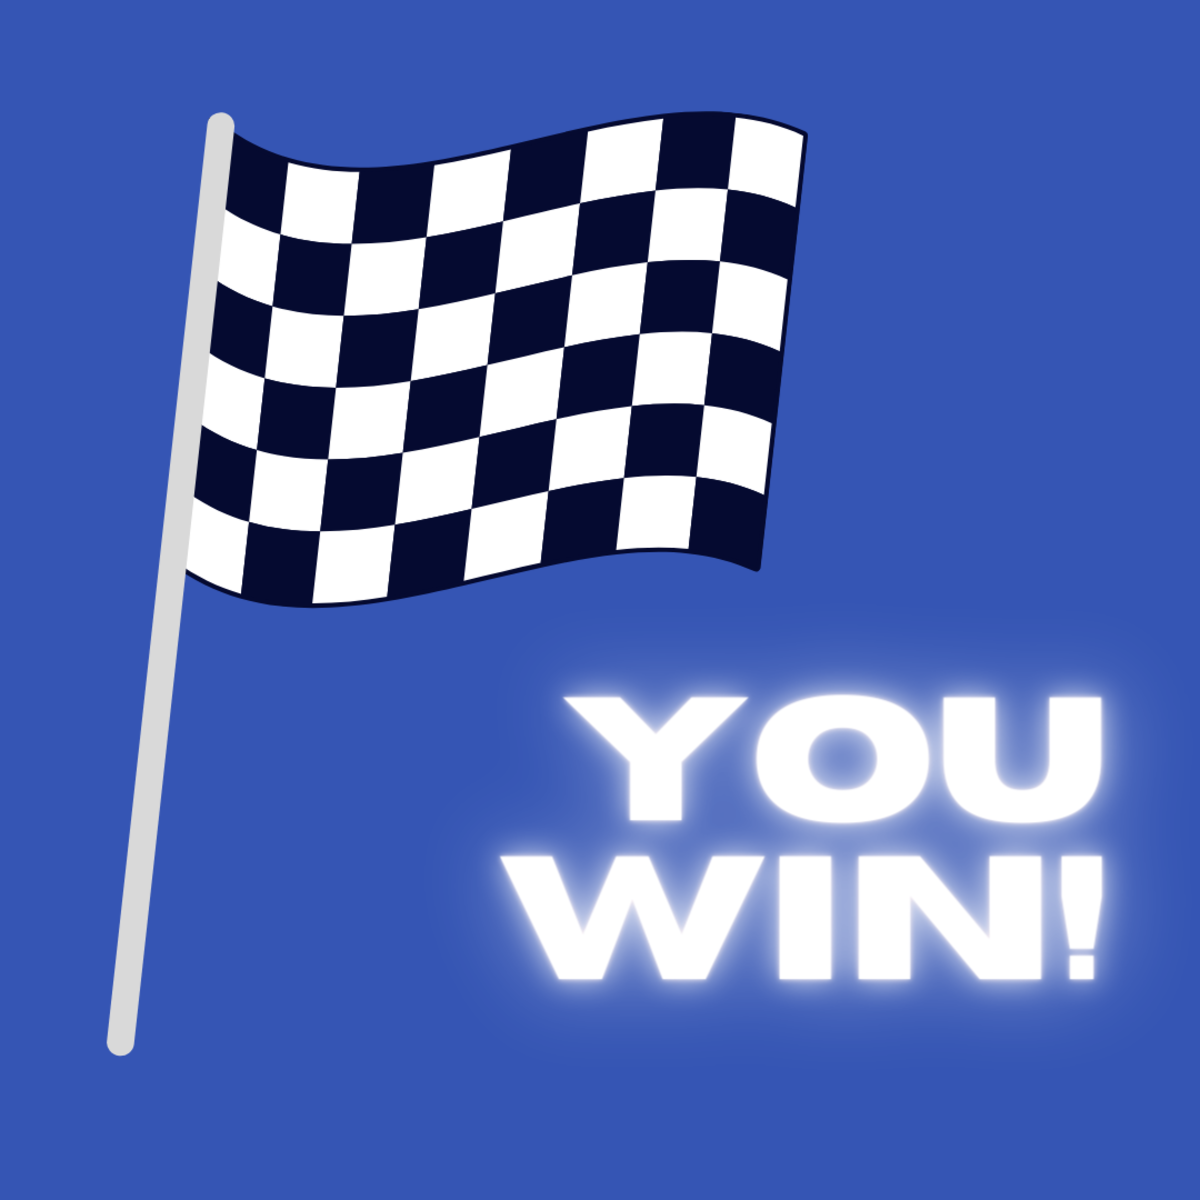 This is the flag every race car driver longs to see!